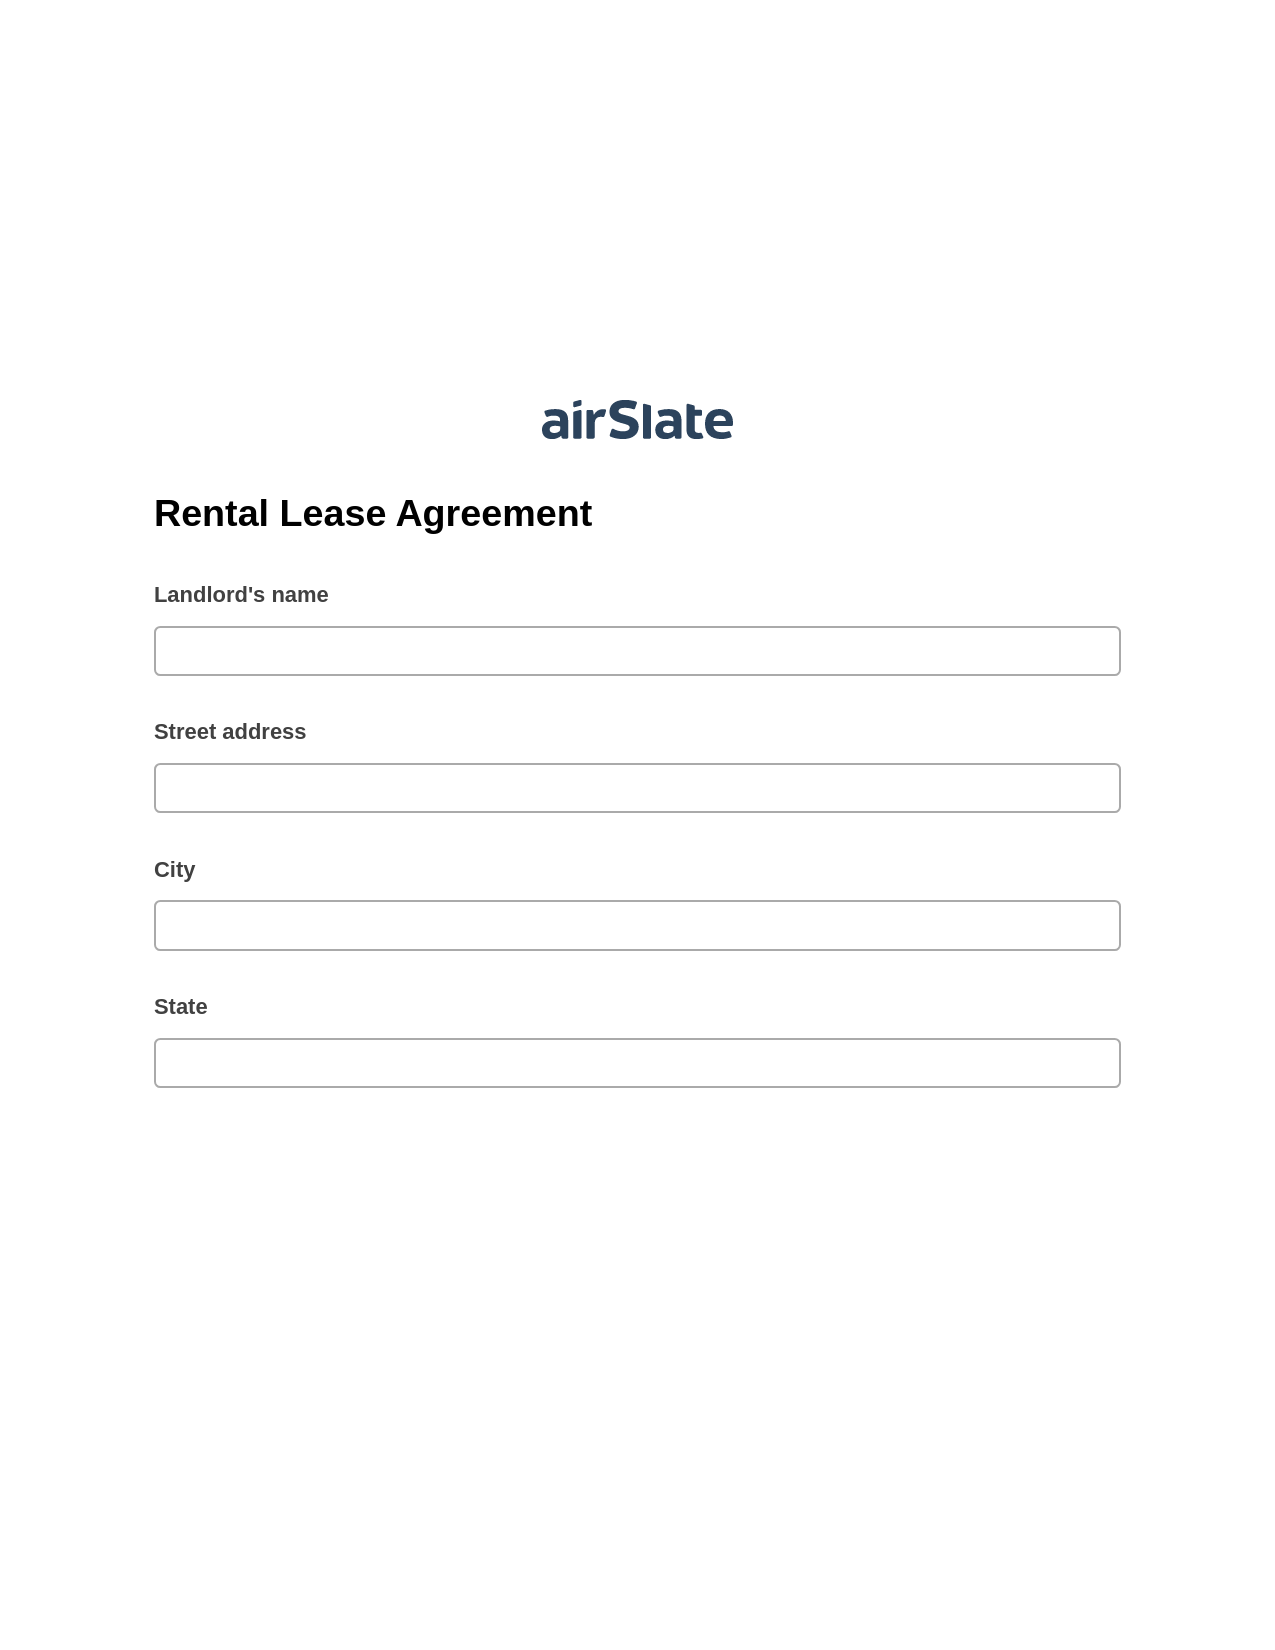 Rental Lease Agreement Pre-fill from MySQL Bot, Update NetSuite Records Bot, Export to Smartsheet